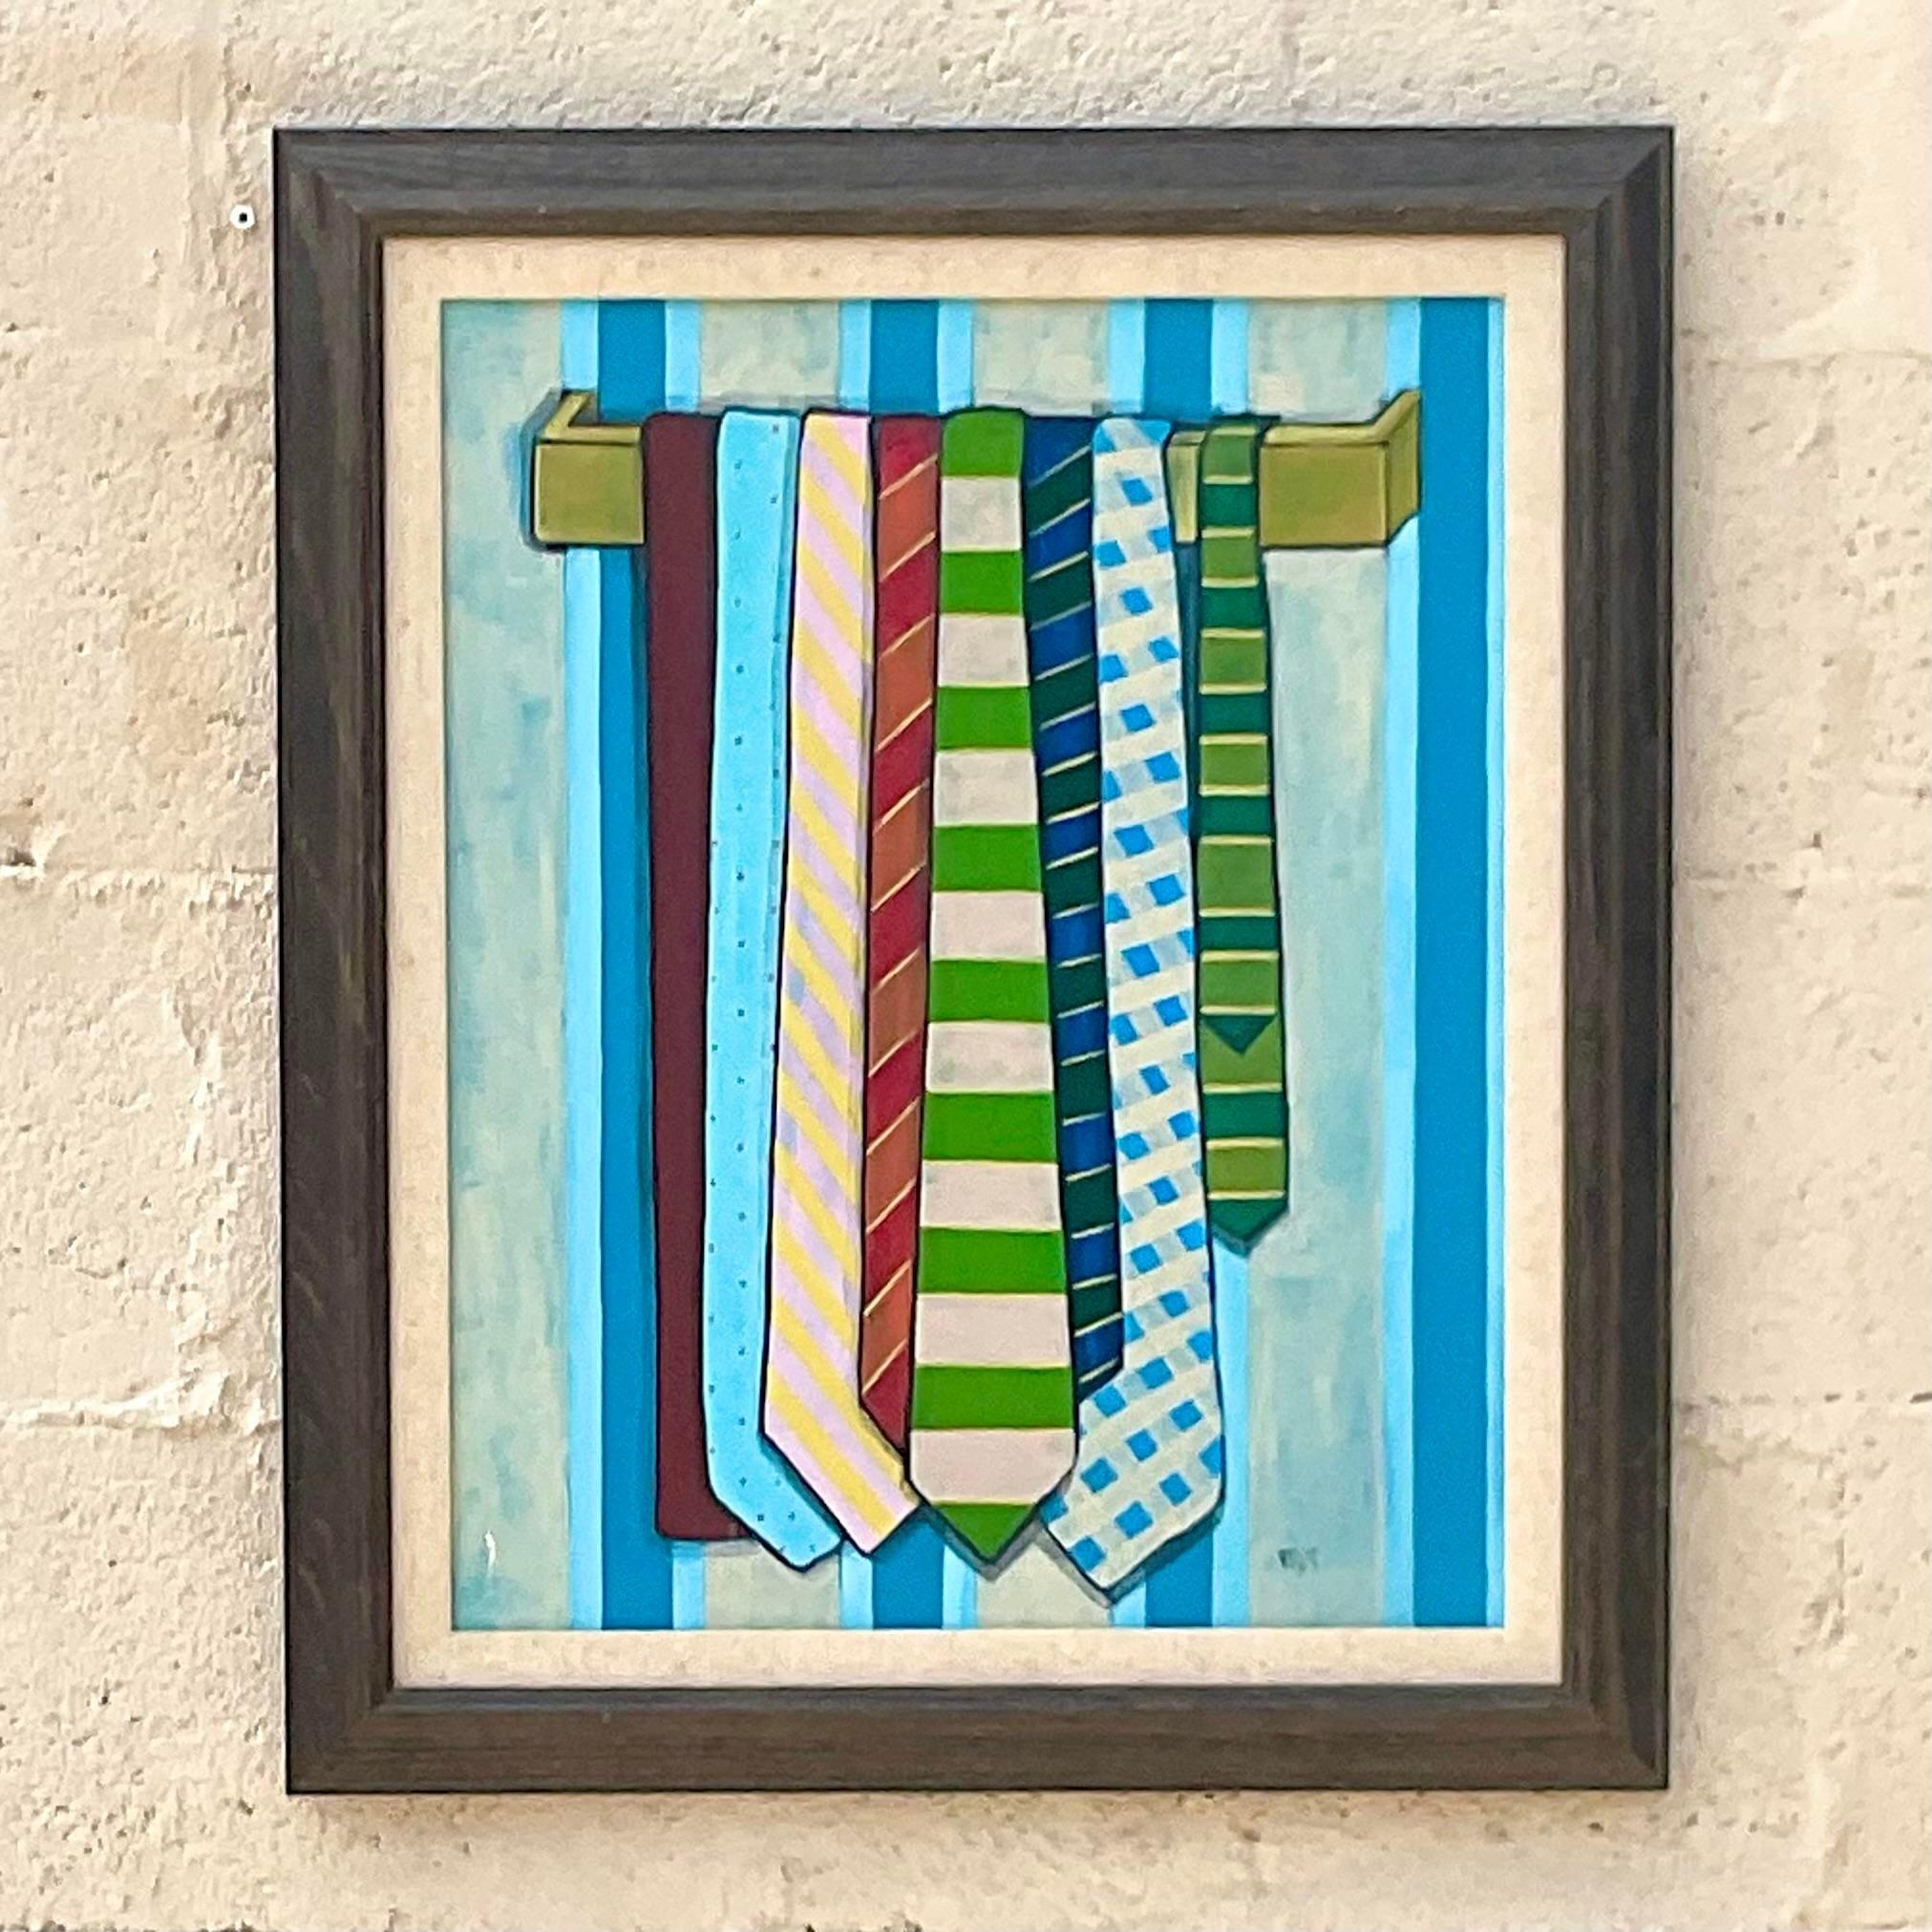 Vintage Boho original oil painting. A chic composition of ties in bright clear colors. Signed by the artist. Acquired from a Palm Beach estate.